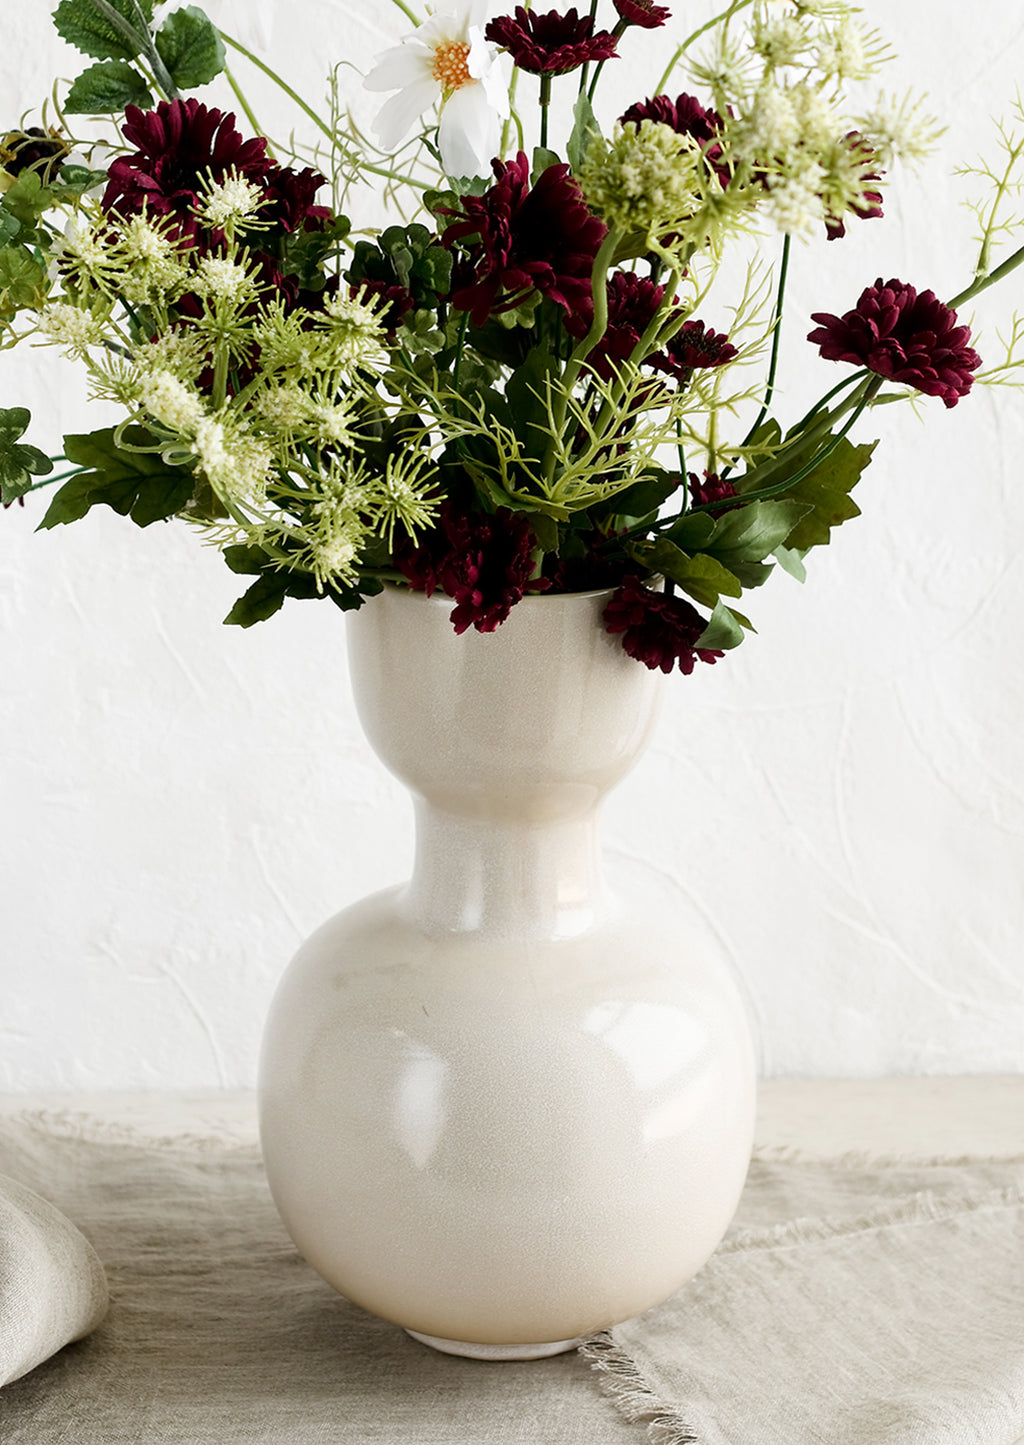 2: A ceramic vase with large arrangement of mixed faux flowers.